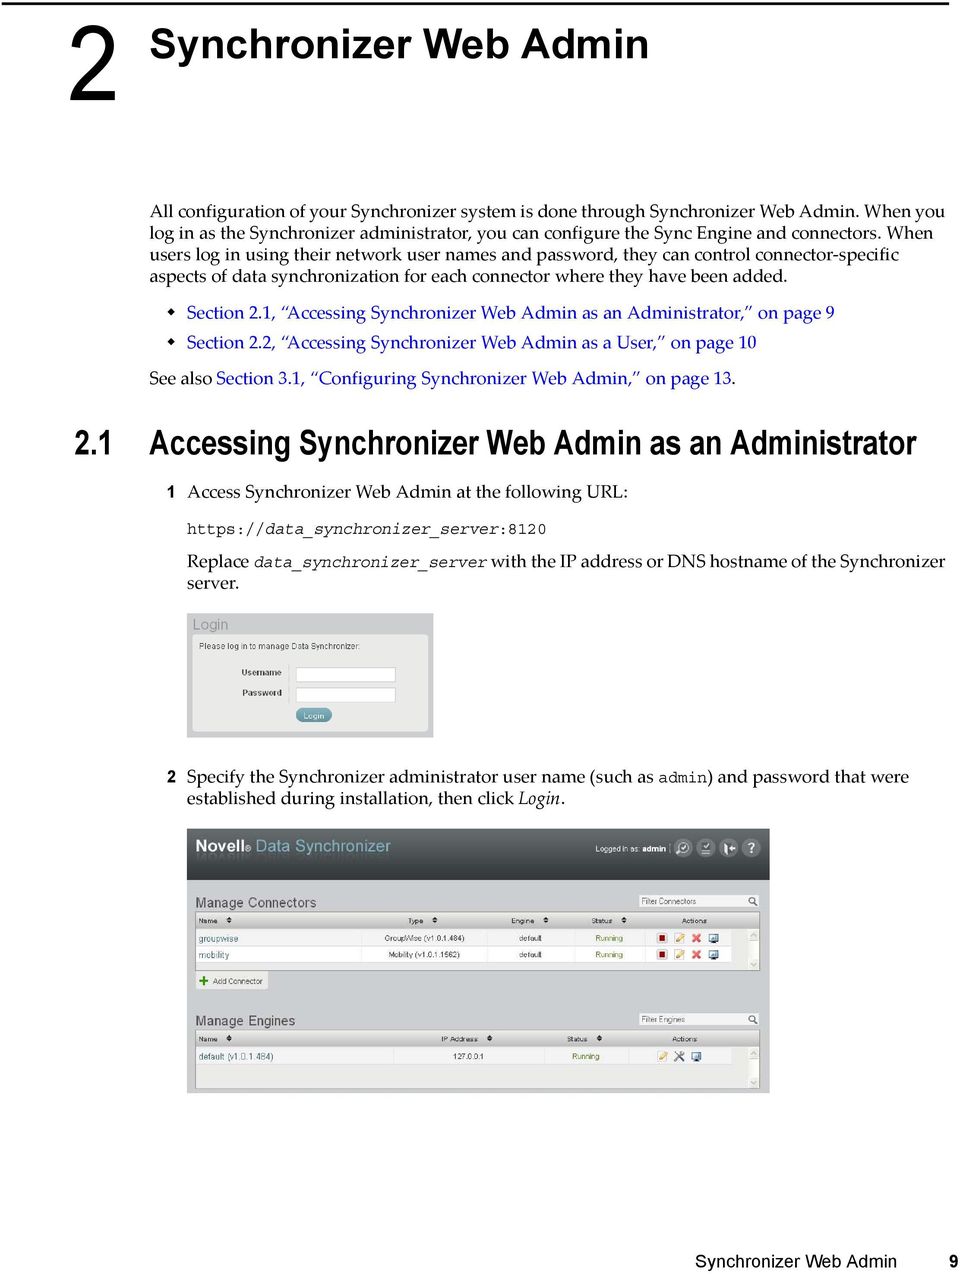 When users log in using their network user names and password, they can control connector-specific aspects of data synchronization for each connector where they have been added. Section 2.